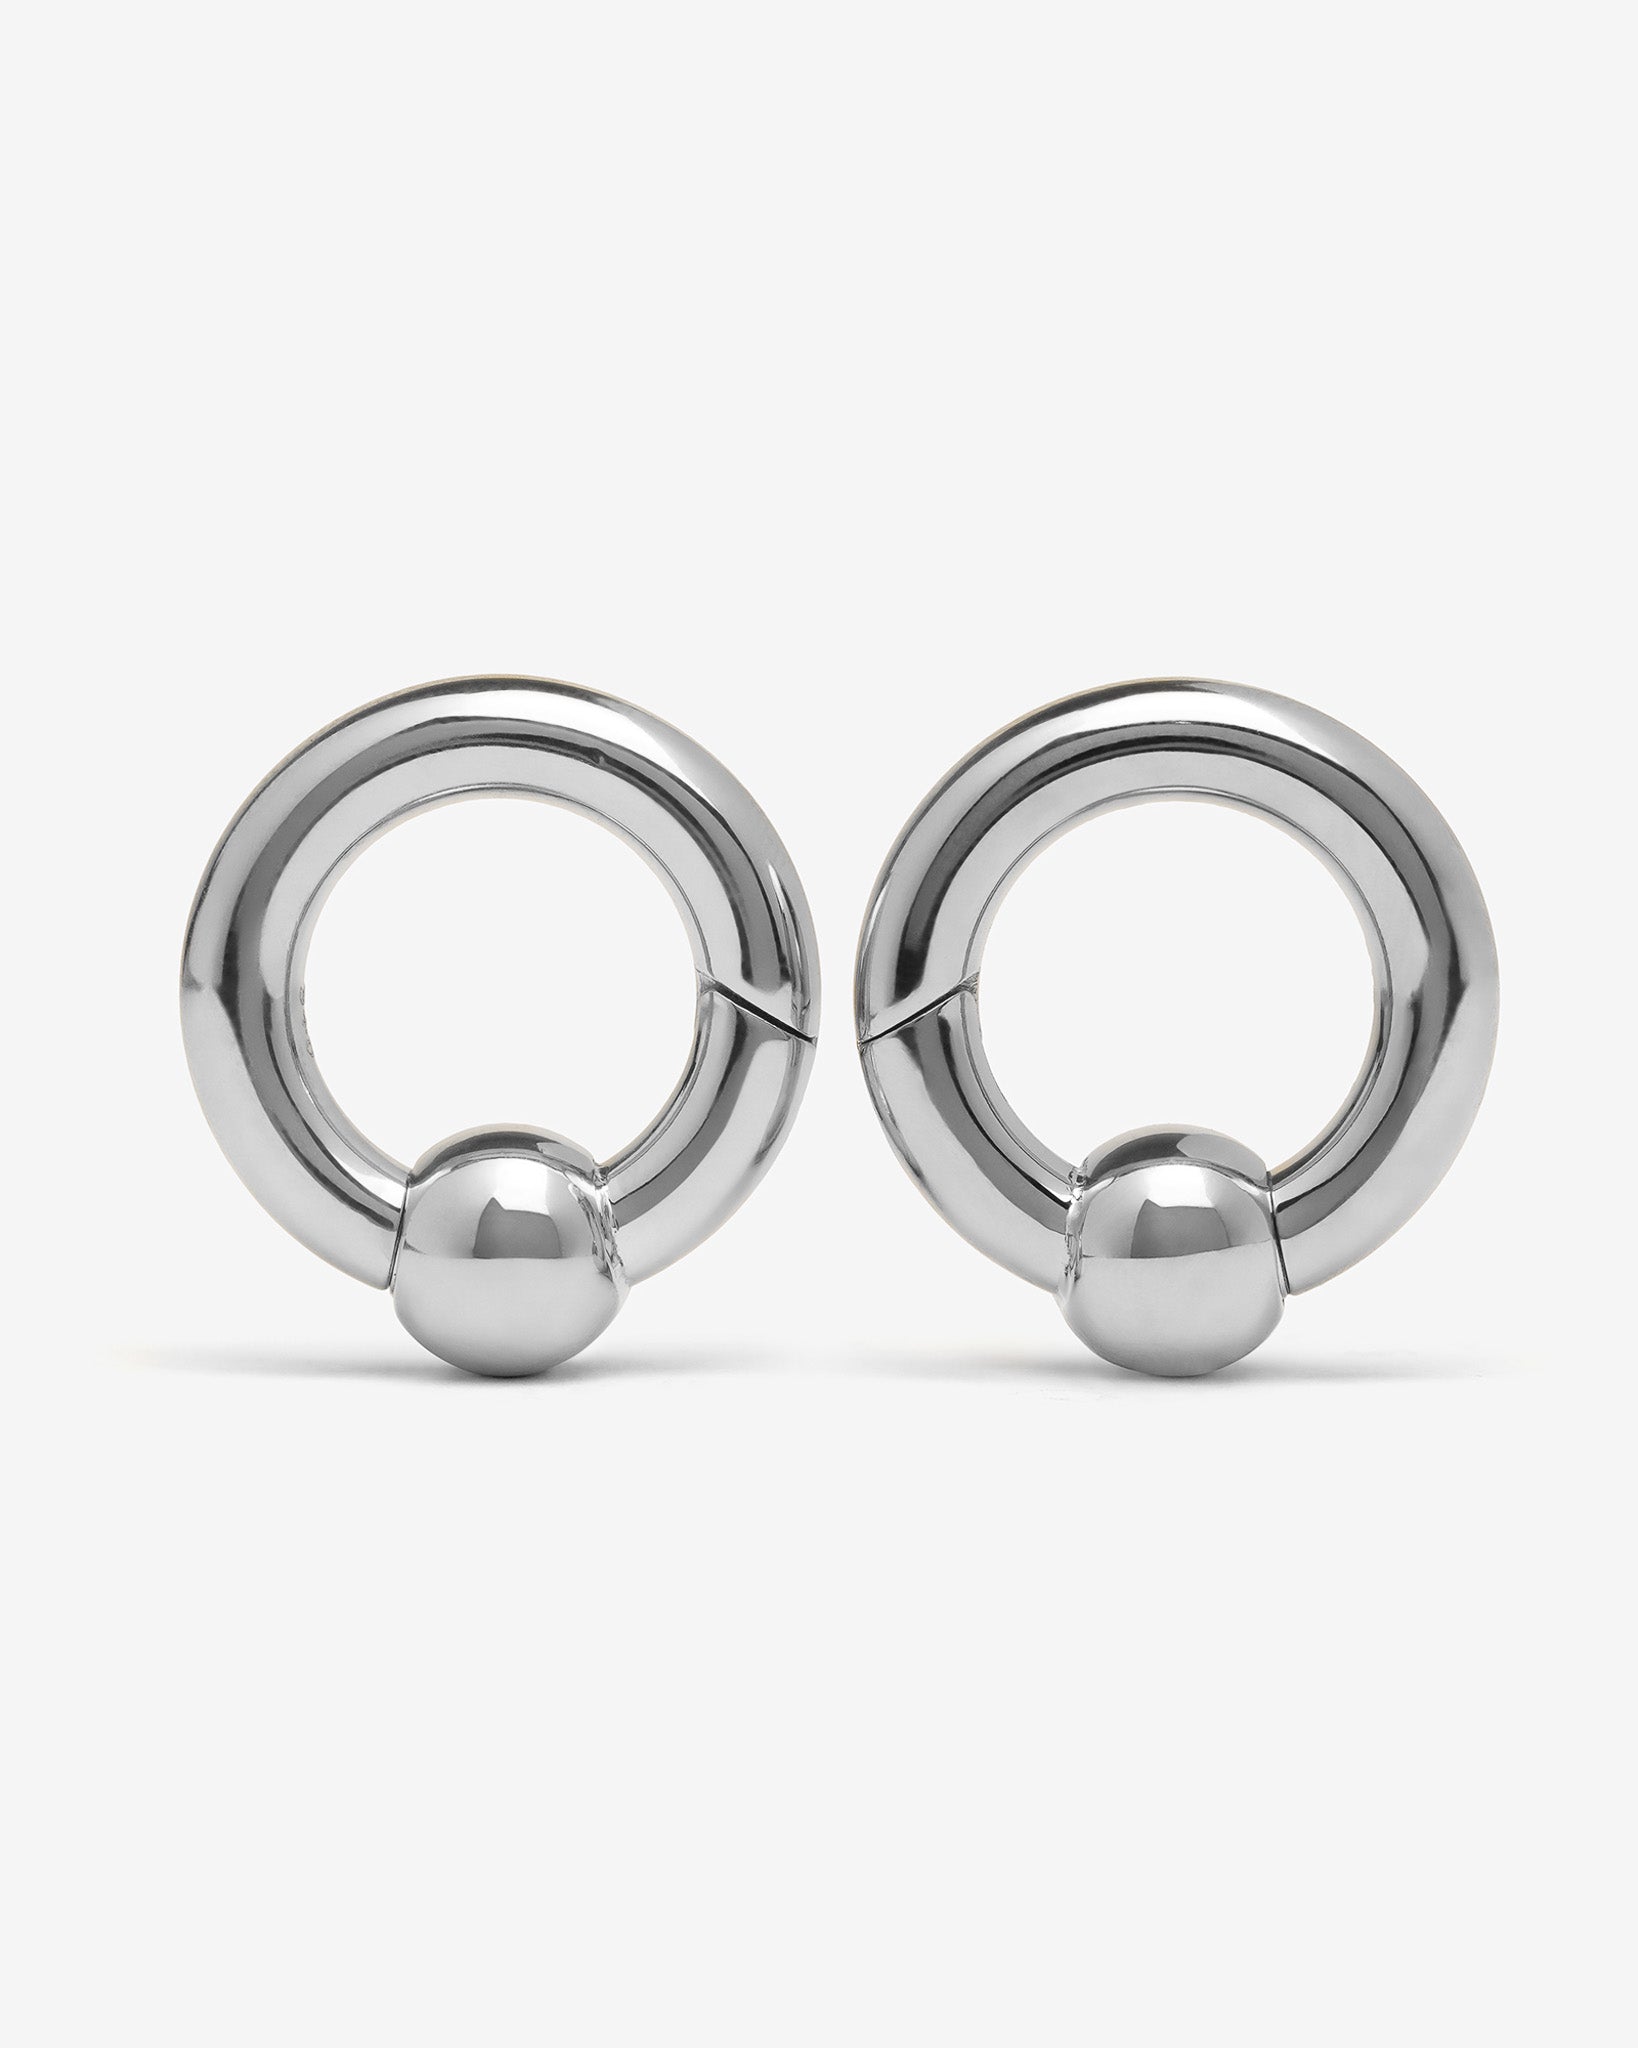 Surgical Steel Captive Bead Ring 20g-14g - BodyMods Jewelry